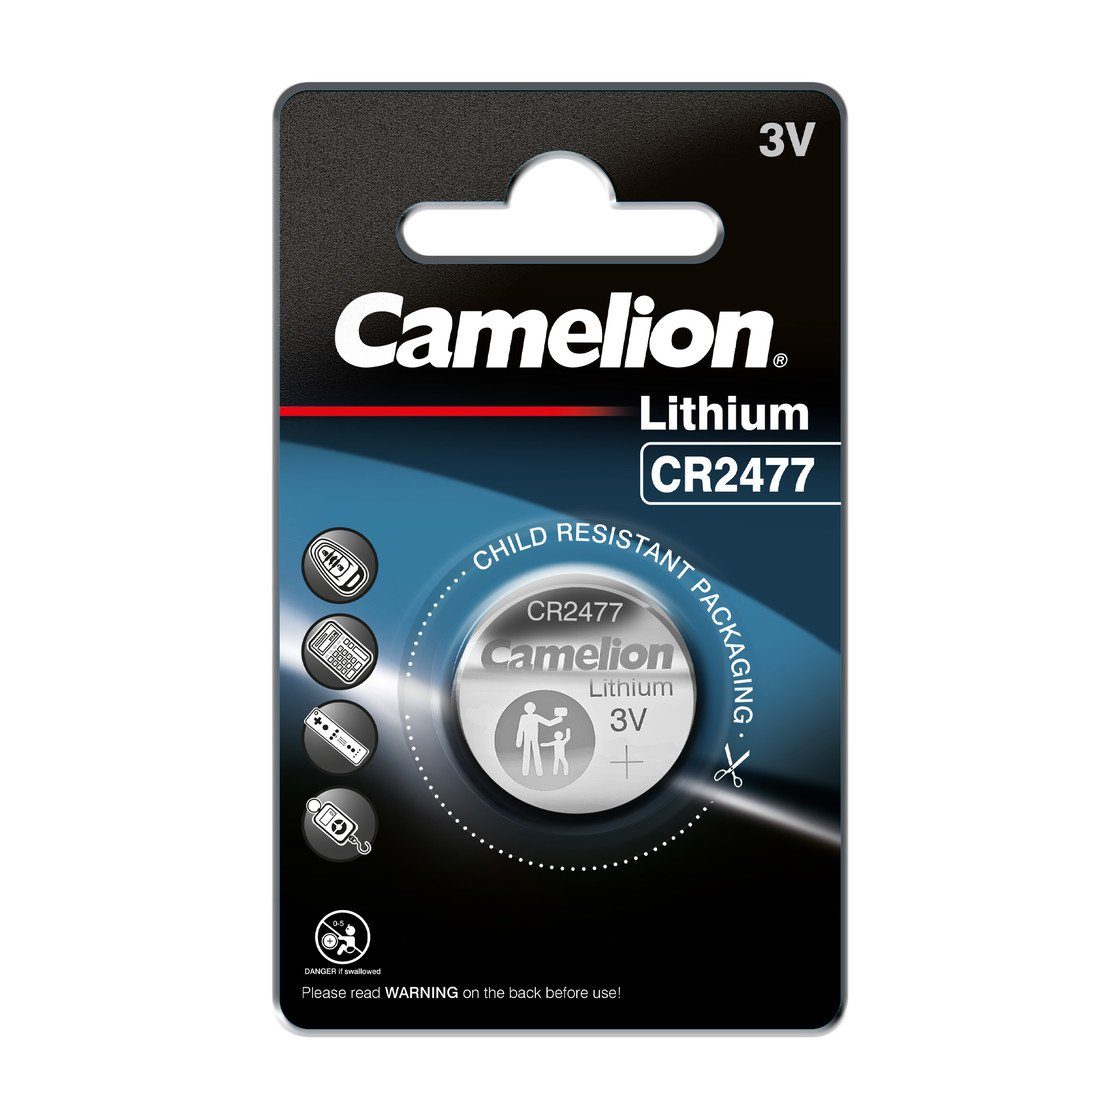 Lithium Alarmanlage CR2477 – Camelion Blister LUPUS ® Knopfzelle gws-powercell V 3 ELECTRONICS